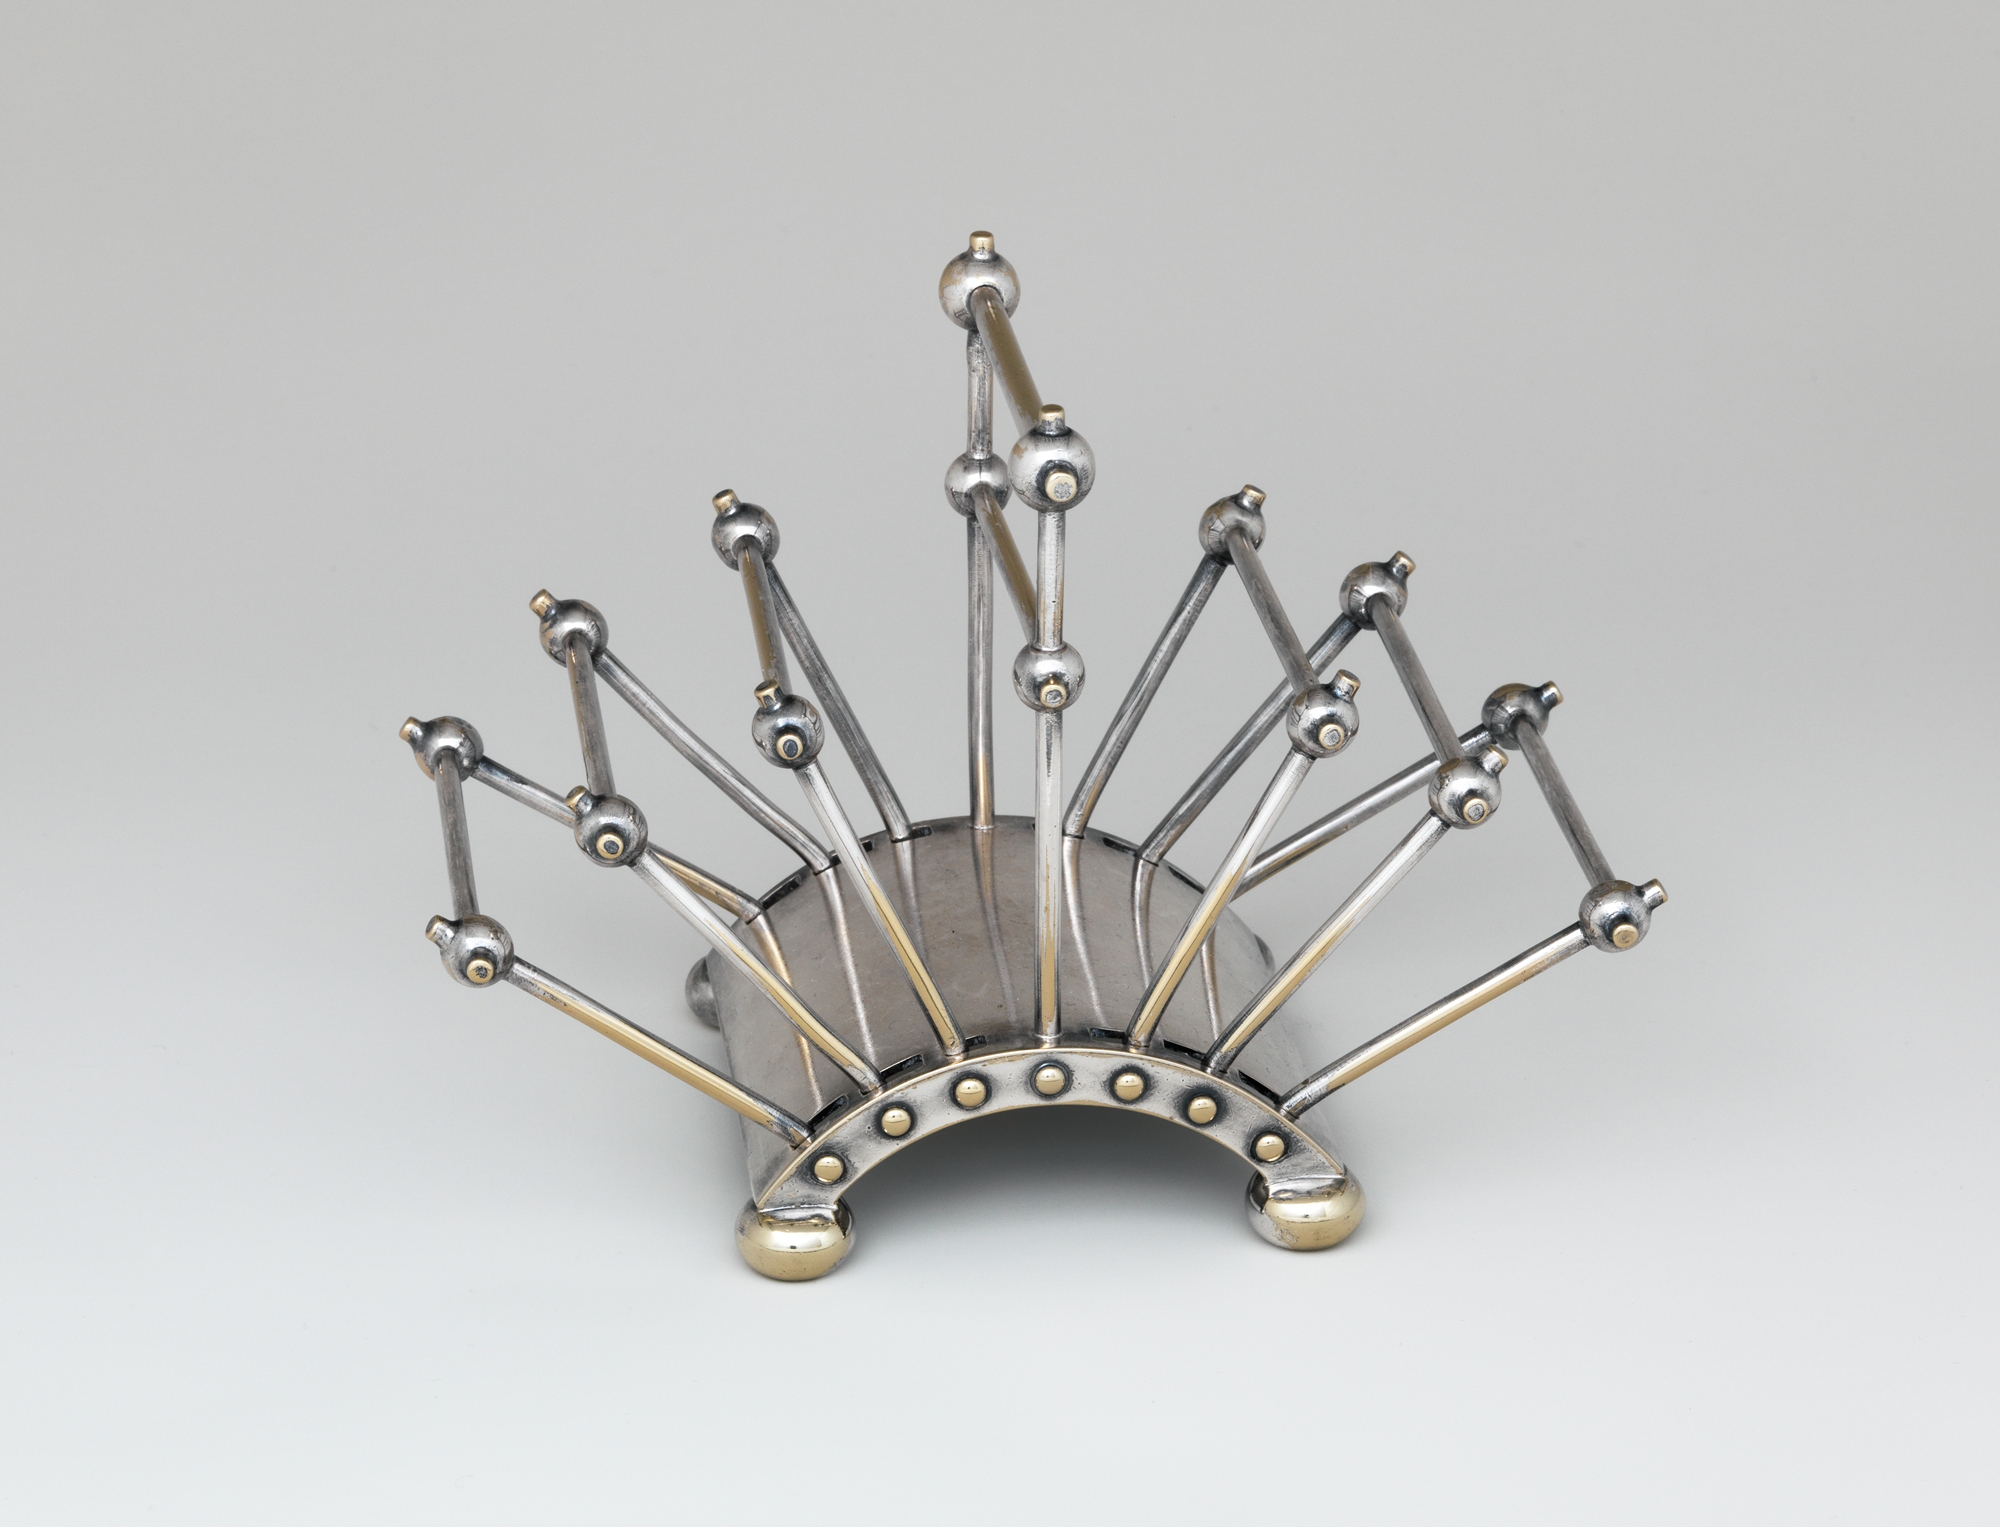 Antique Toast Rack History (and How to Use One Today)